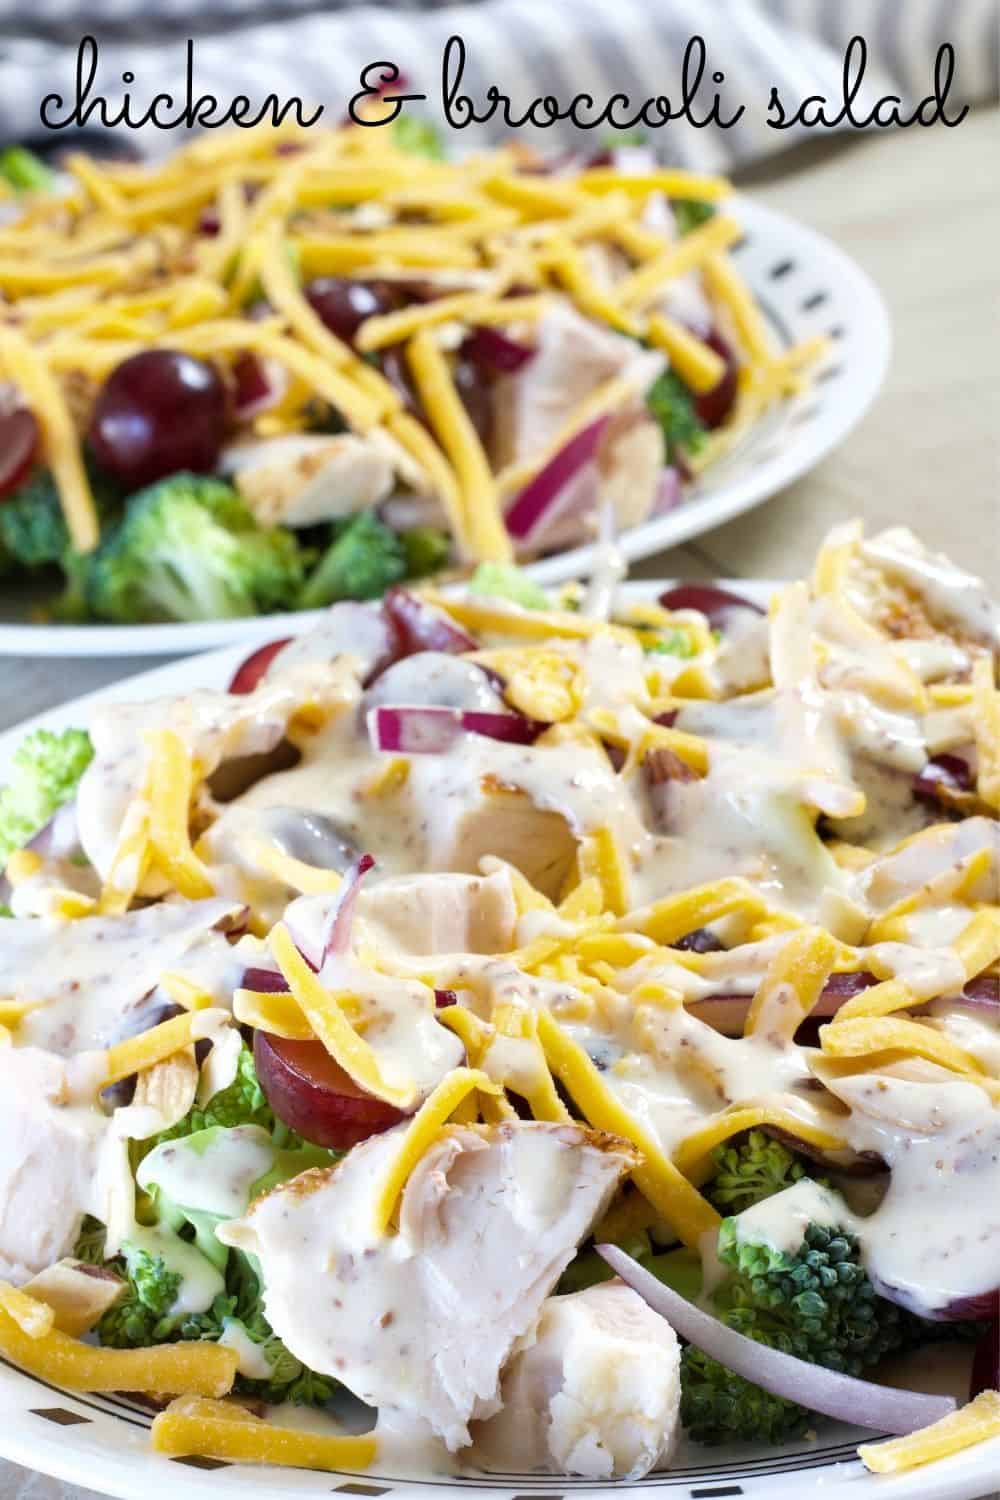 Chicken & Broccoli Salad uses leftover chicken or you can use nuggets or tenders from your favorite restaurant to make this even faster. #chickenbroccolisalad #dinnersalad #saladwithmeat #easydinnerrecipe